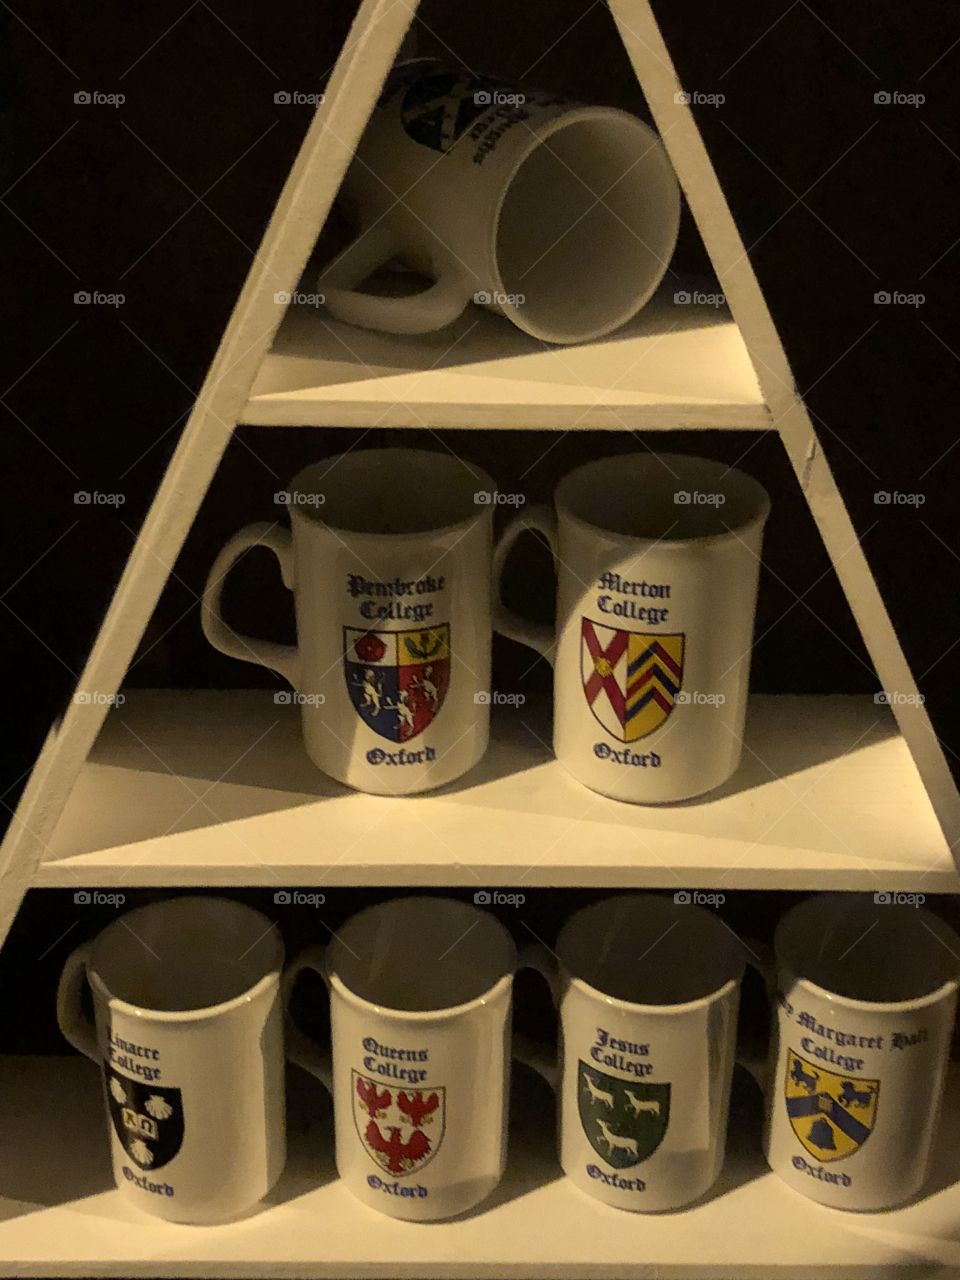 The cup of the collection!